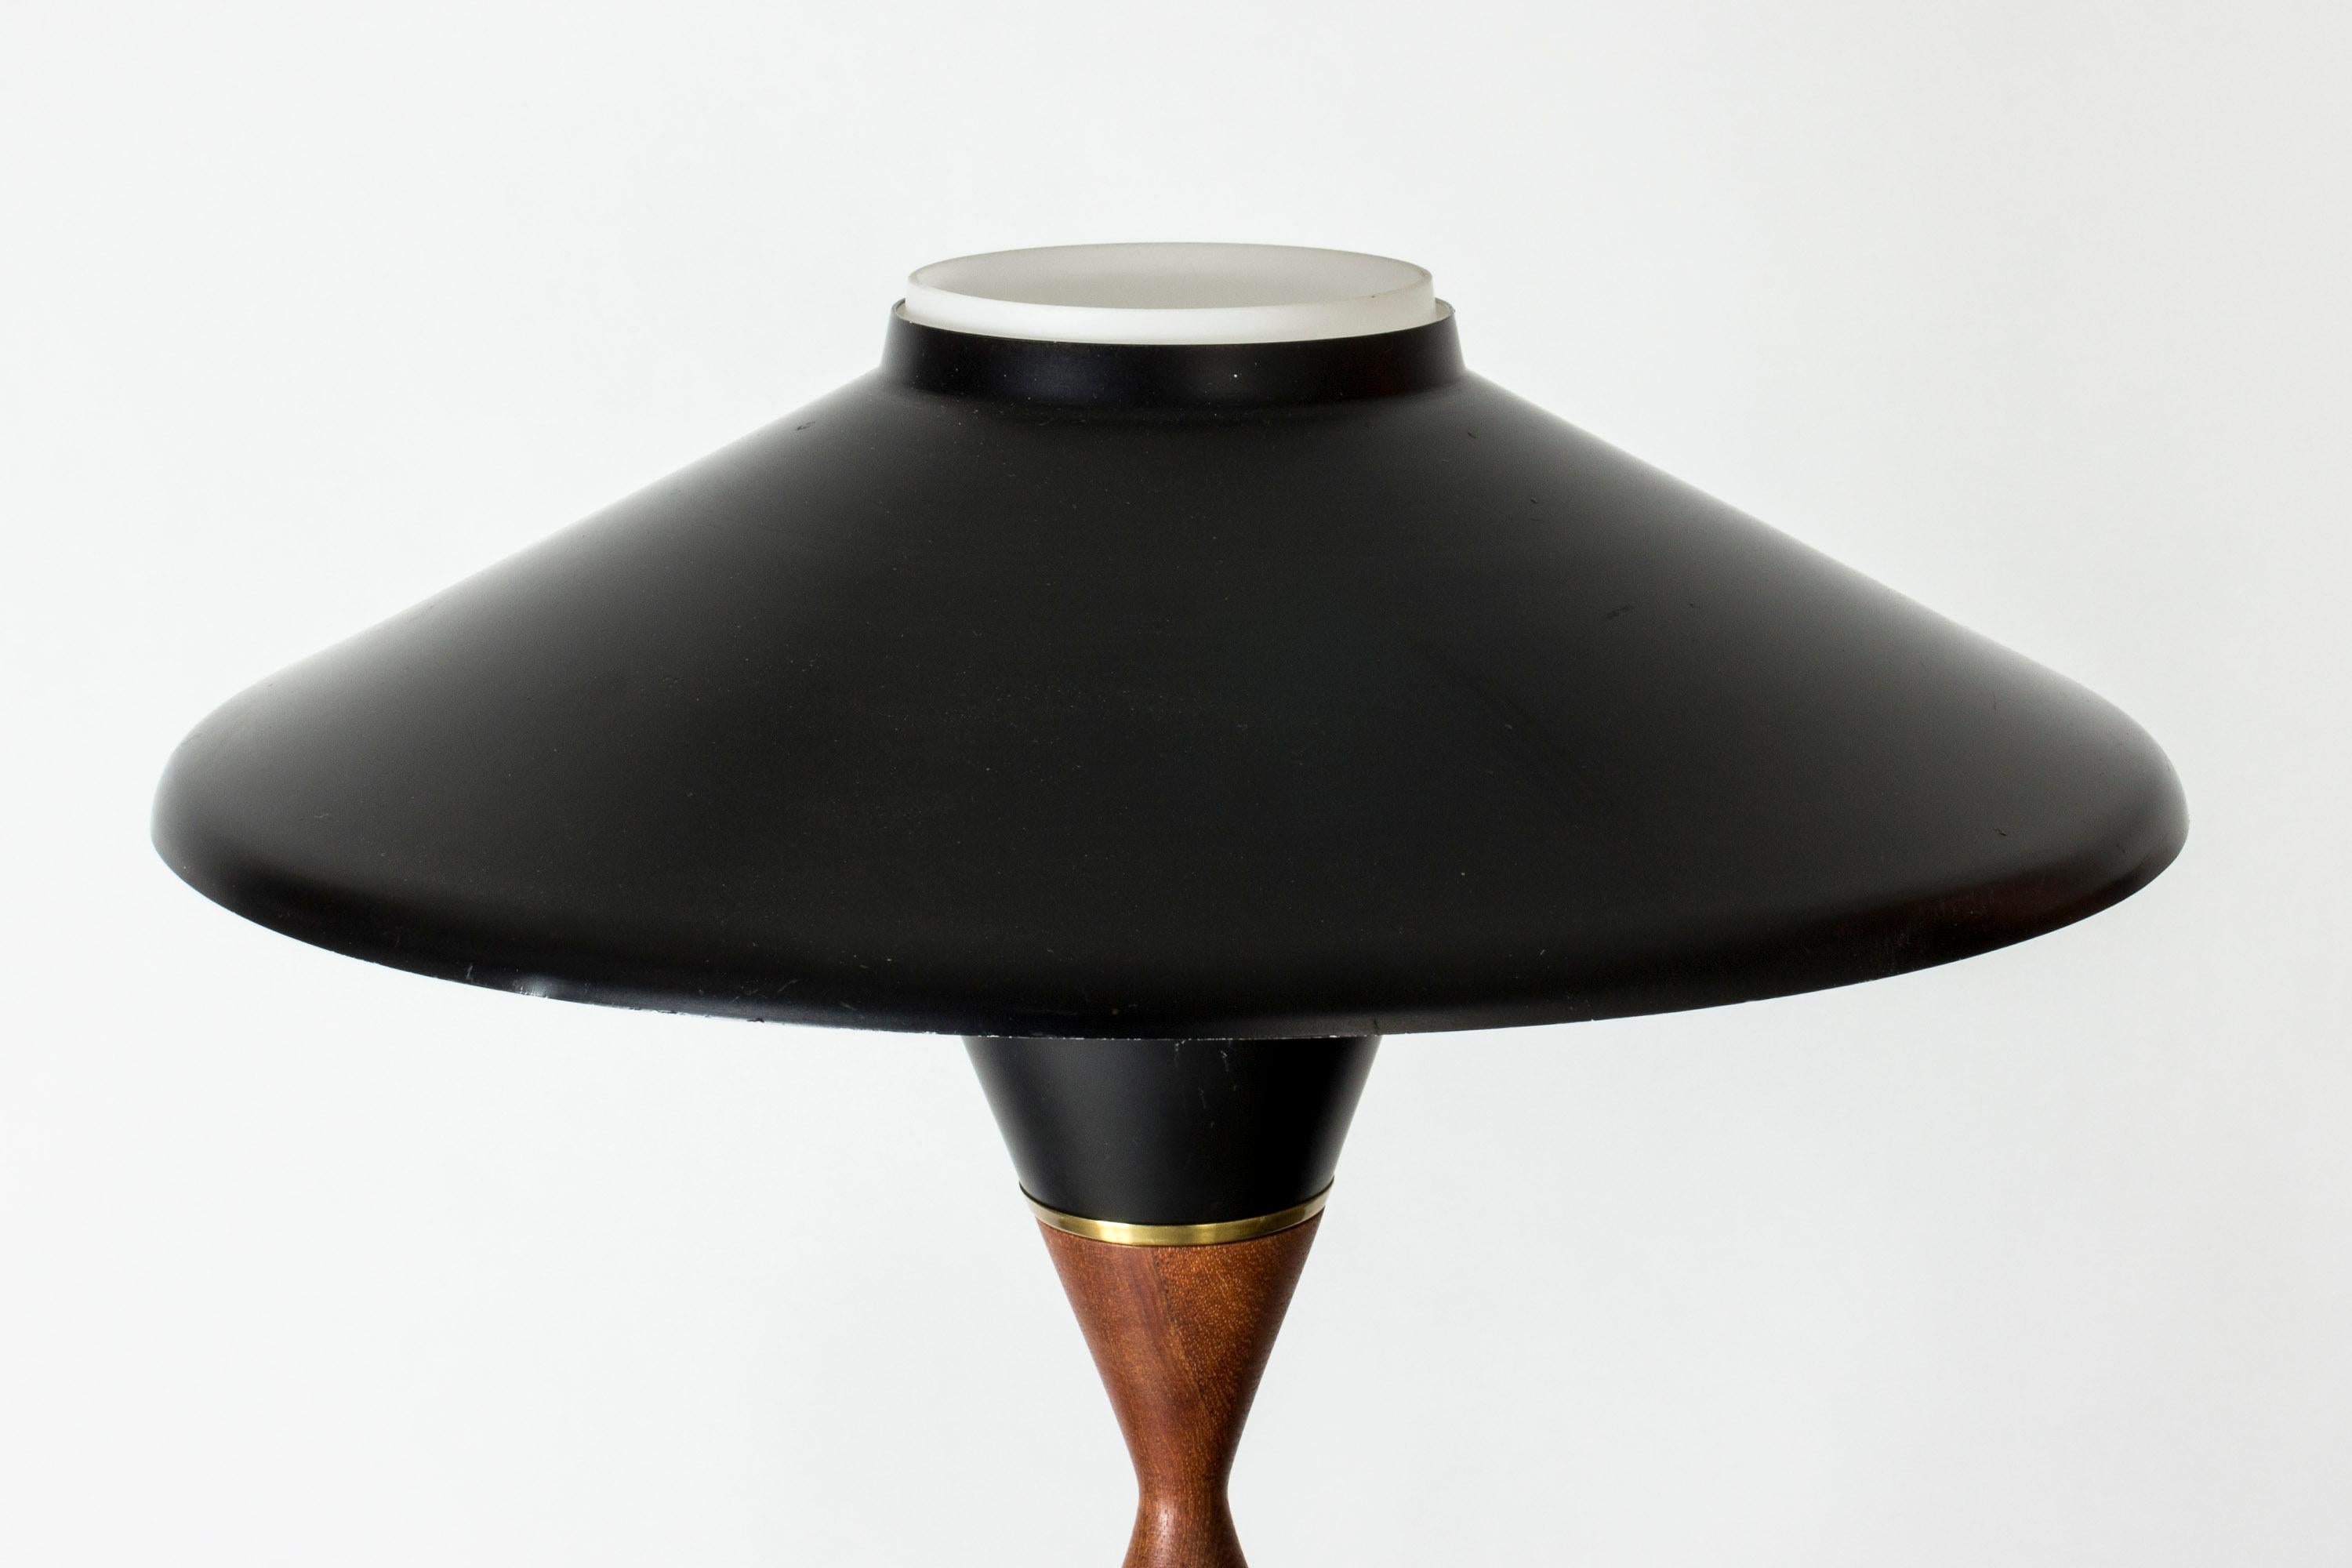 Mid-20th Century Modernist Table Lamp by Svend Aage Holm Sørensen, Denmark, 1950s For Sale